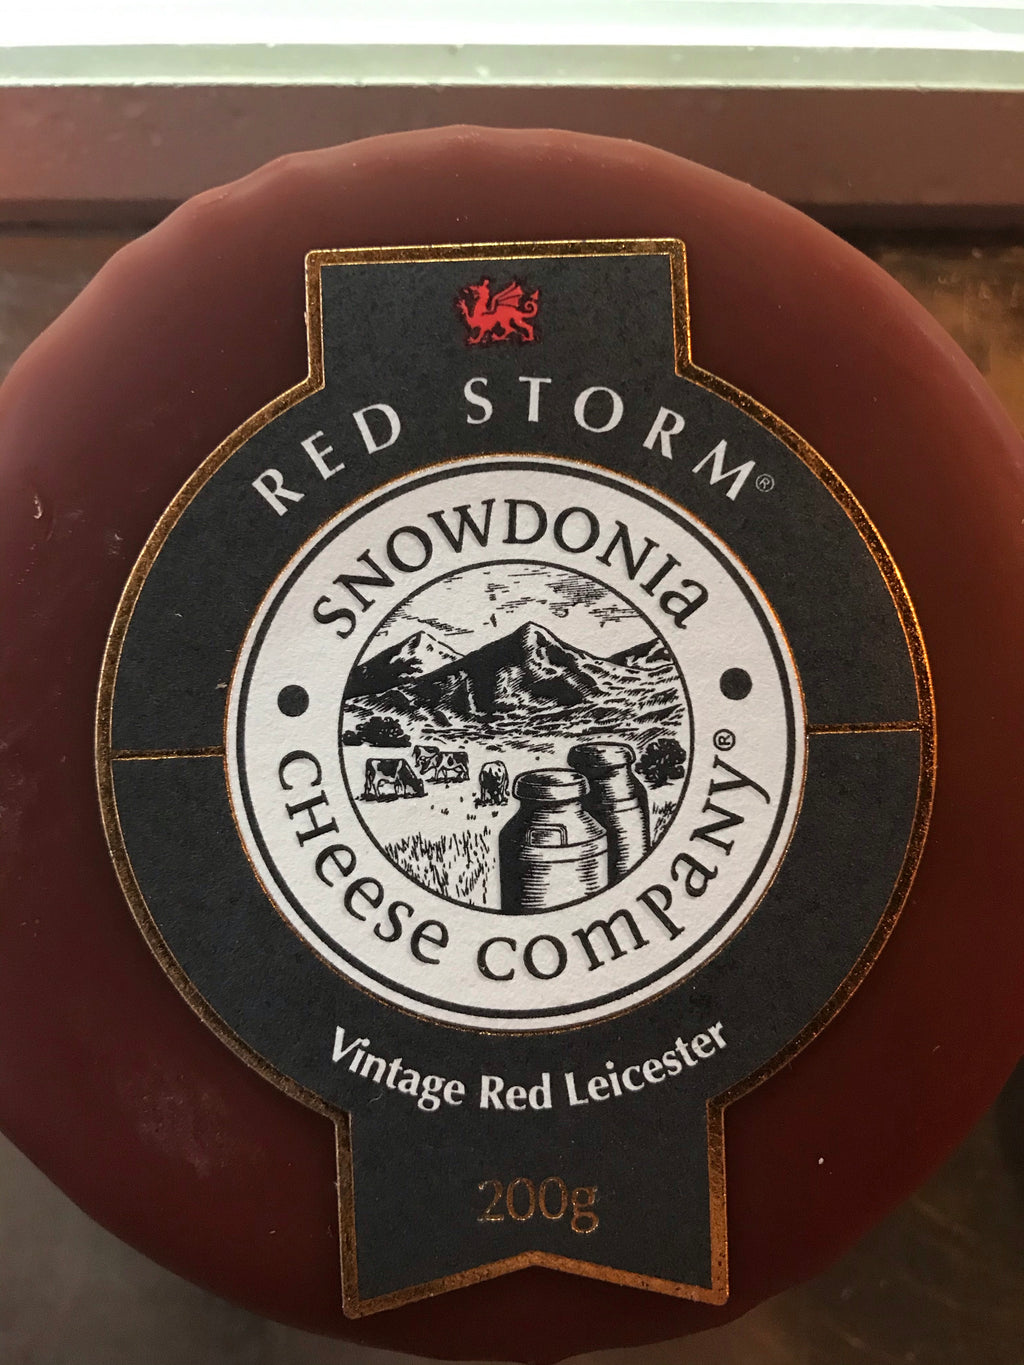 Snowdonia Truckle - Red Storm - Vintage Red Leicester